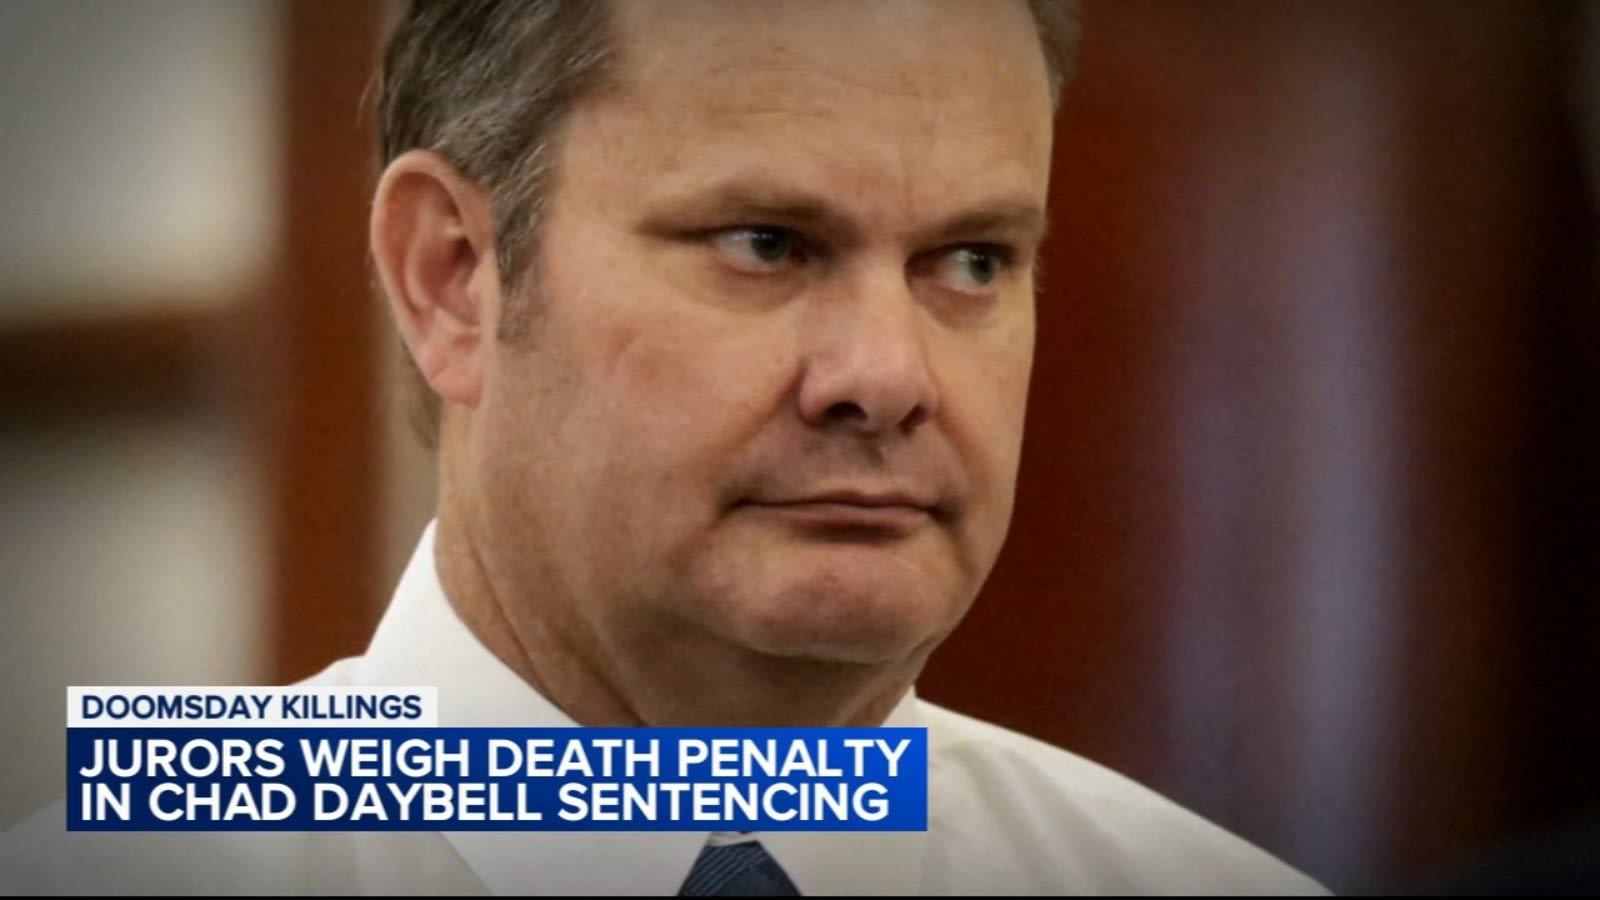 Idaho jury reaches verdict in sentencing of Chad Daybell, who faces death penalty for 3 murders